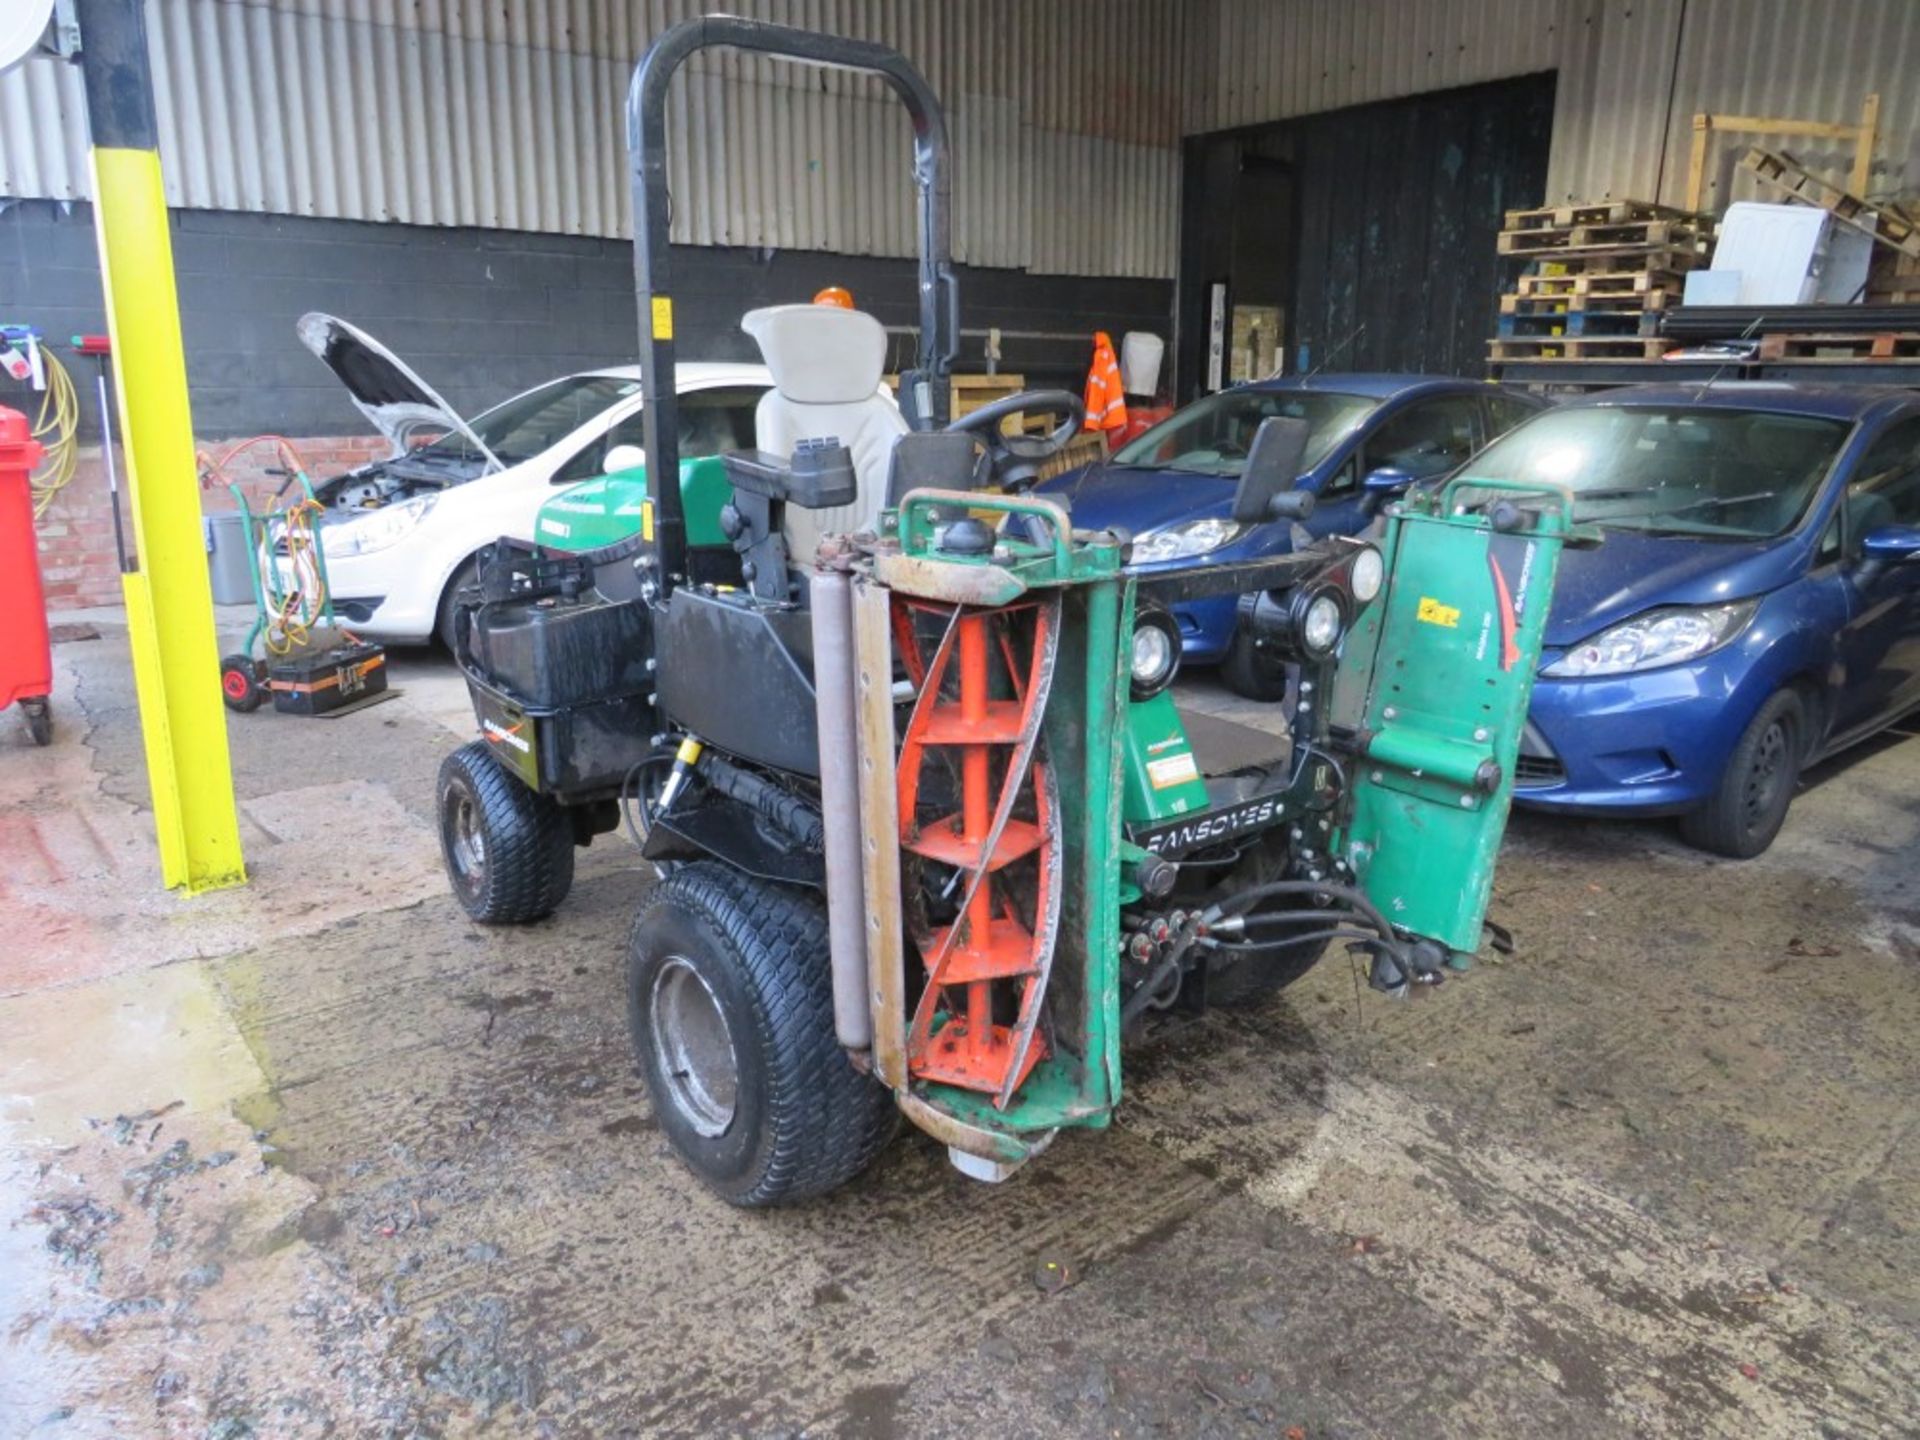 12 reg RANSOME PARKWAY 3 RIDE ON MOWER (DIRECT COUNCIL) 2176 HOURS, V5 HERE, 1 OWNER FROM NEW [+